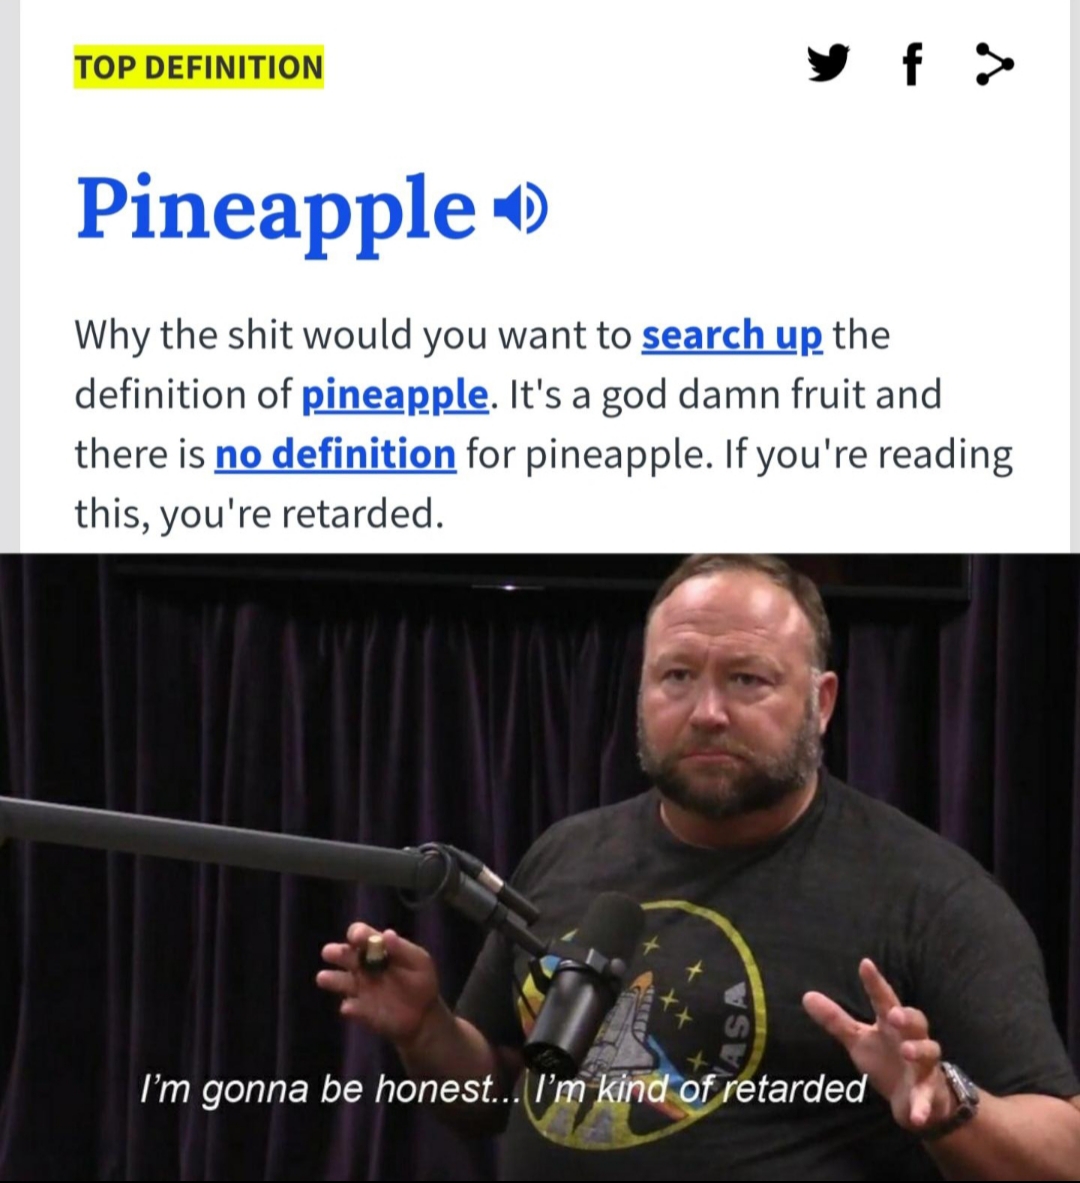 jre meme - Top Definition Pineapple Why the shit would you want to search up the definition of pineapple. It's a god damn fruit and there is no definition for pineapple. If you're reading this, you're retarded. I'm gonna be honest... I'm kind of retarded